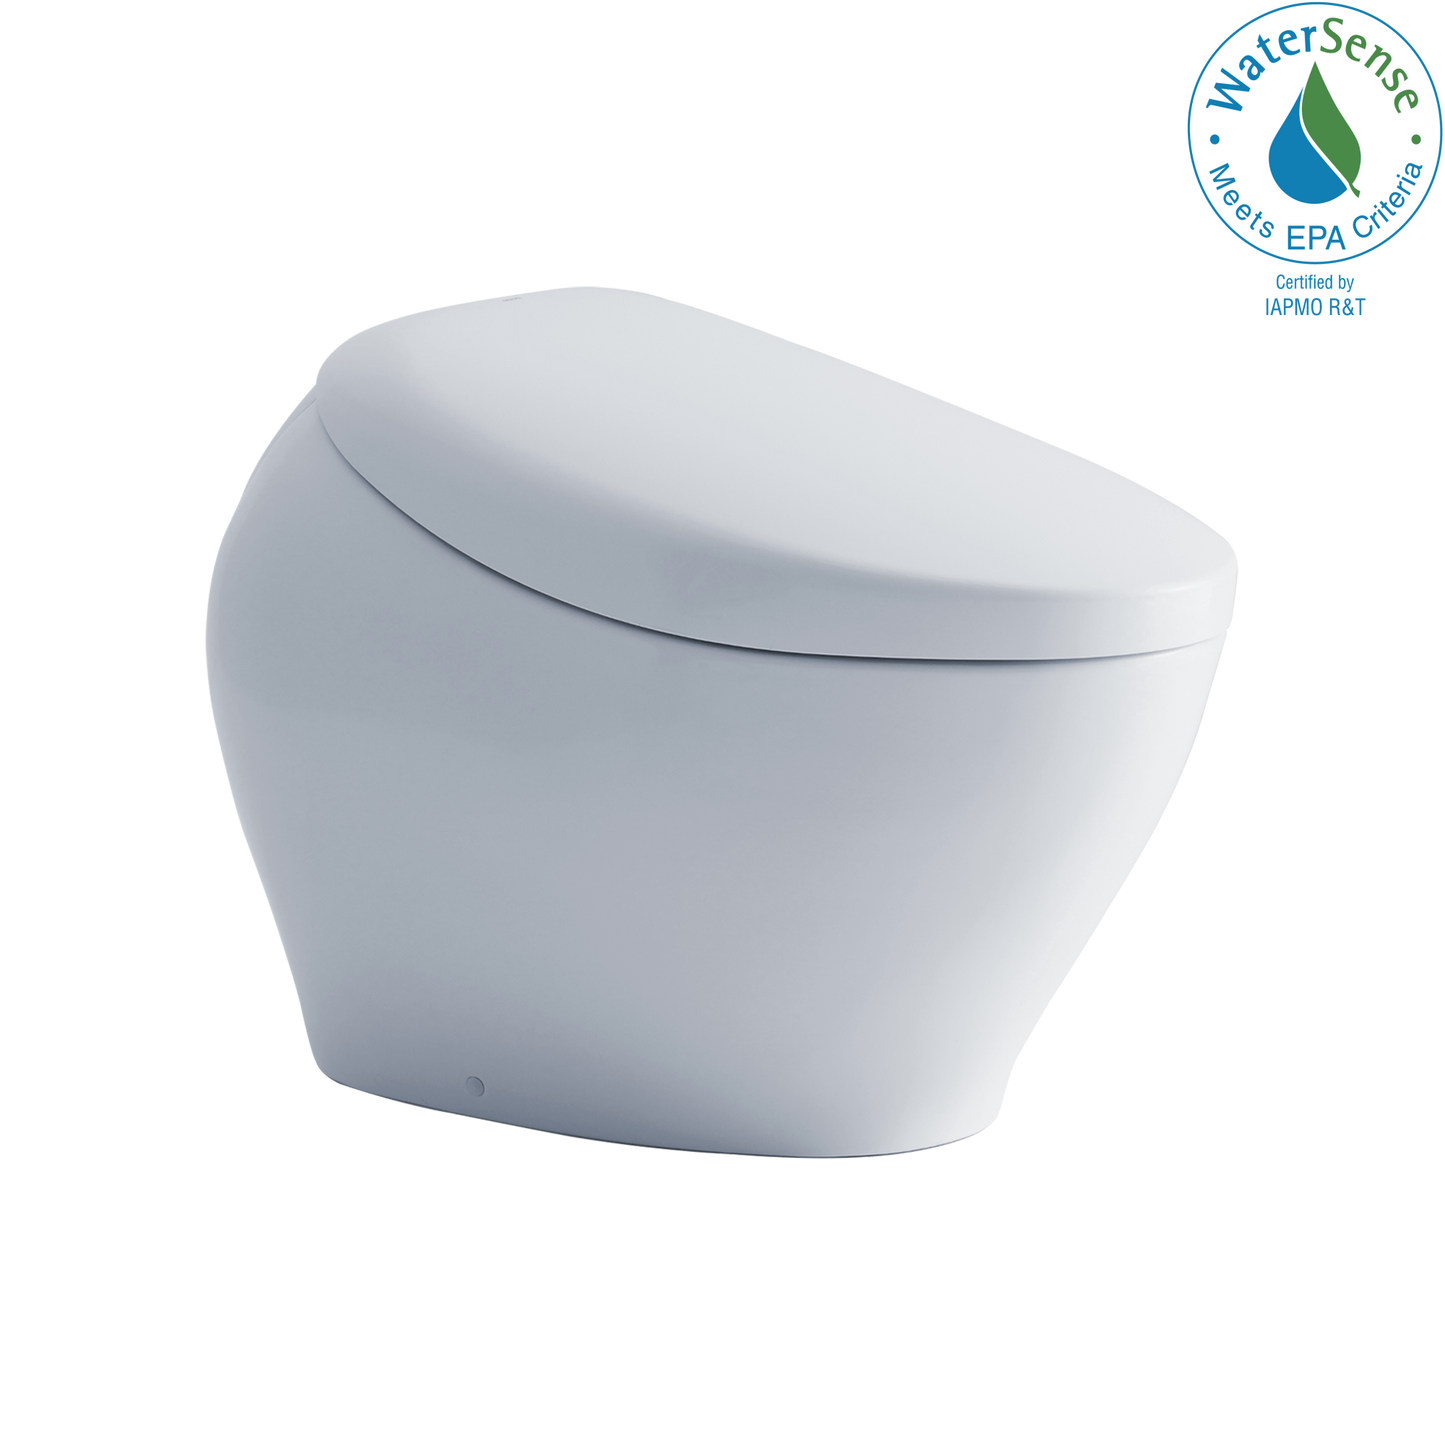 TOTO® NEOREST® NX1 Dual Flush 1.0 or 0.8 GPF Toilet with Integrated Bidet Seat, EWATER+® - Cotton White - MS902CUMFG#01